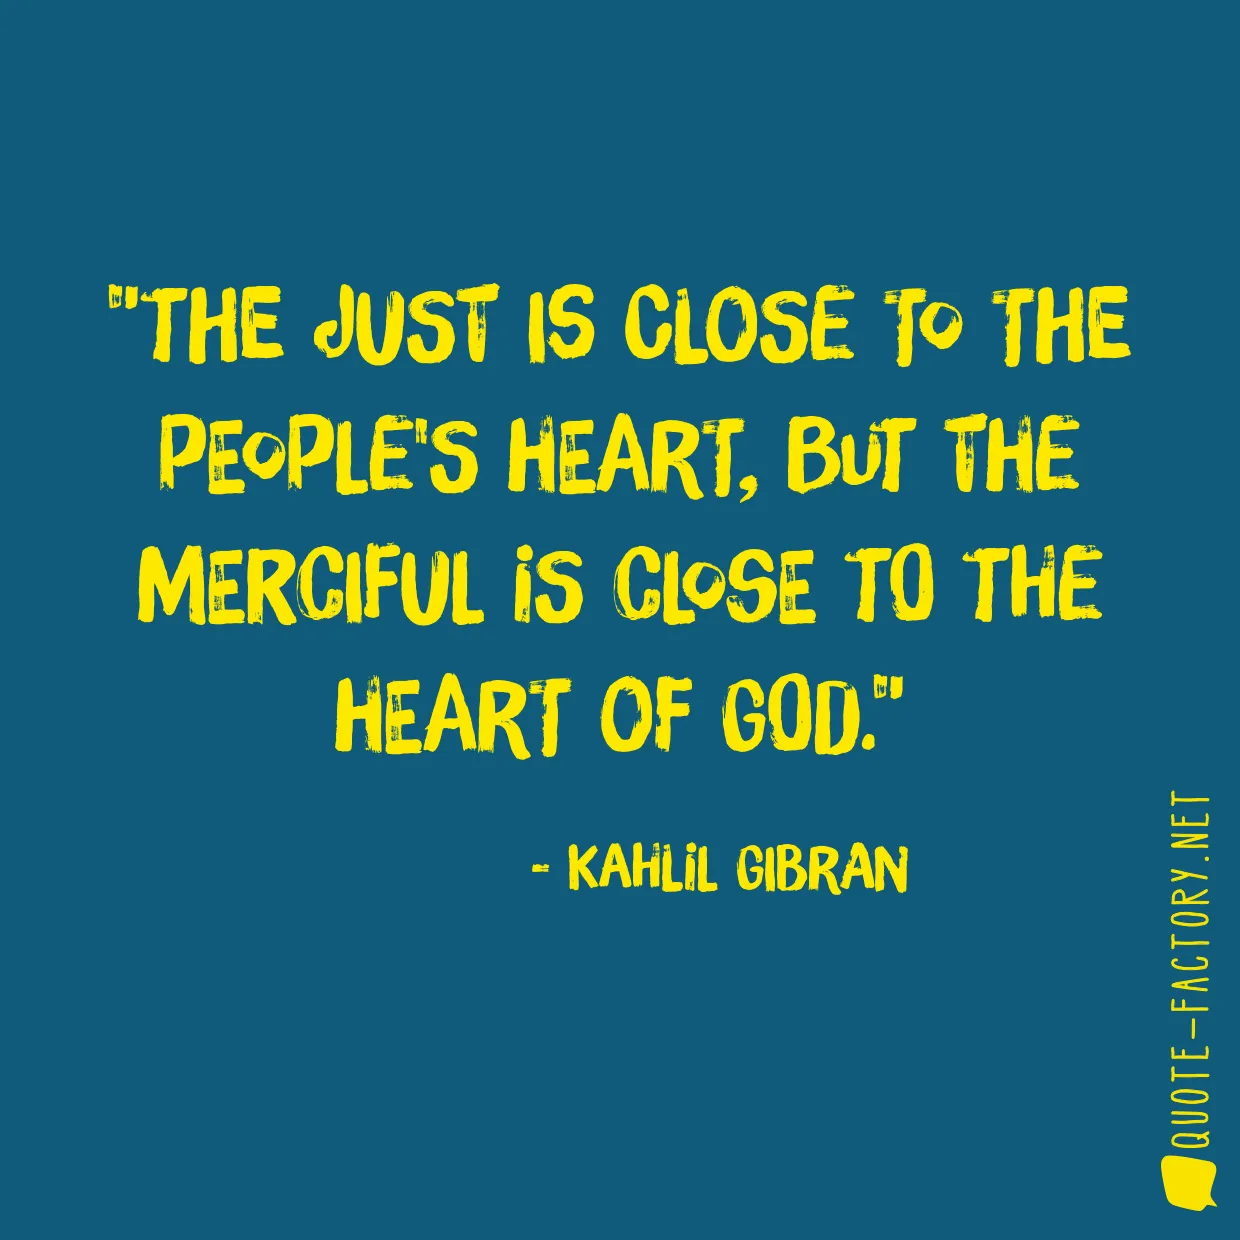 The just is close to the people's heart, but the merciful is close to the heart of God.